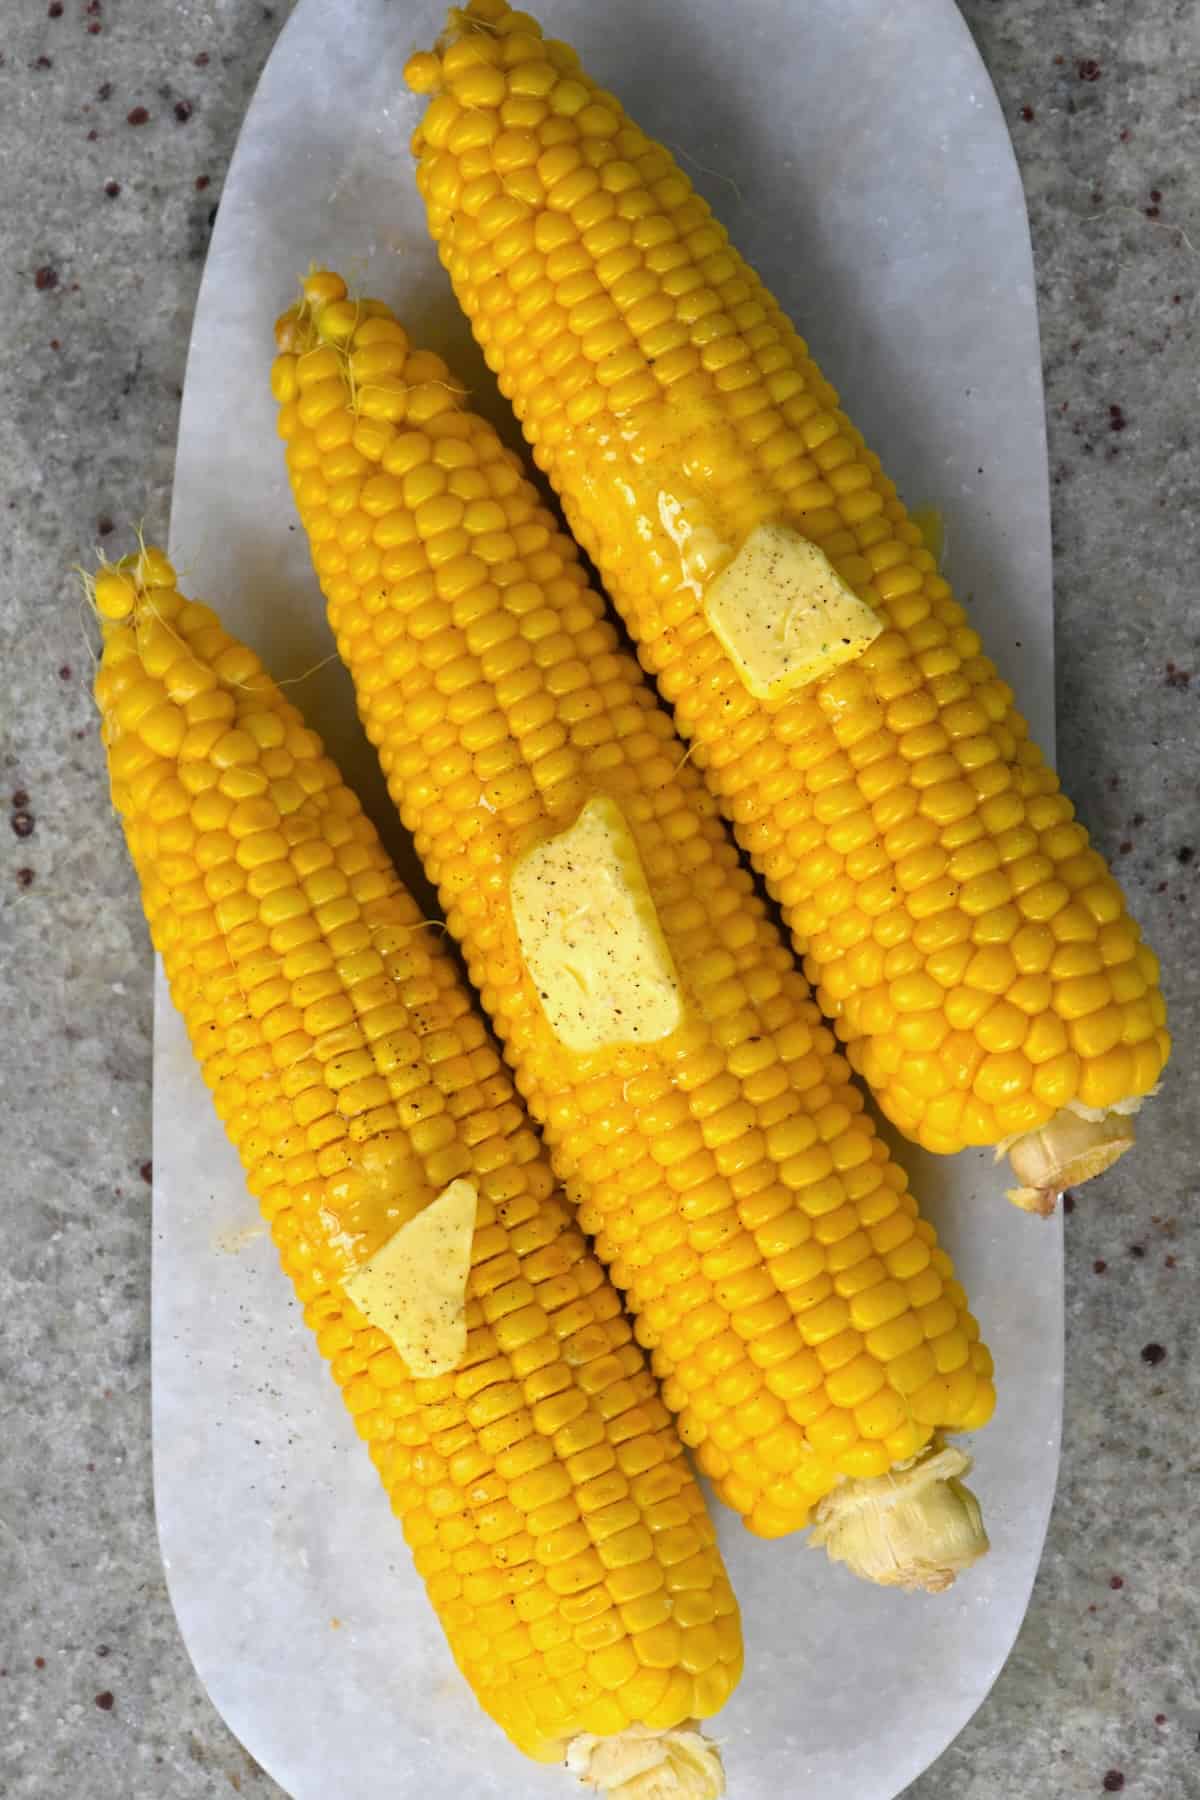 Cooked corn on the cob with melting butter on top